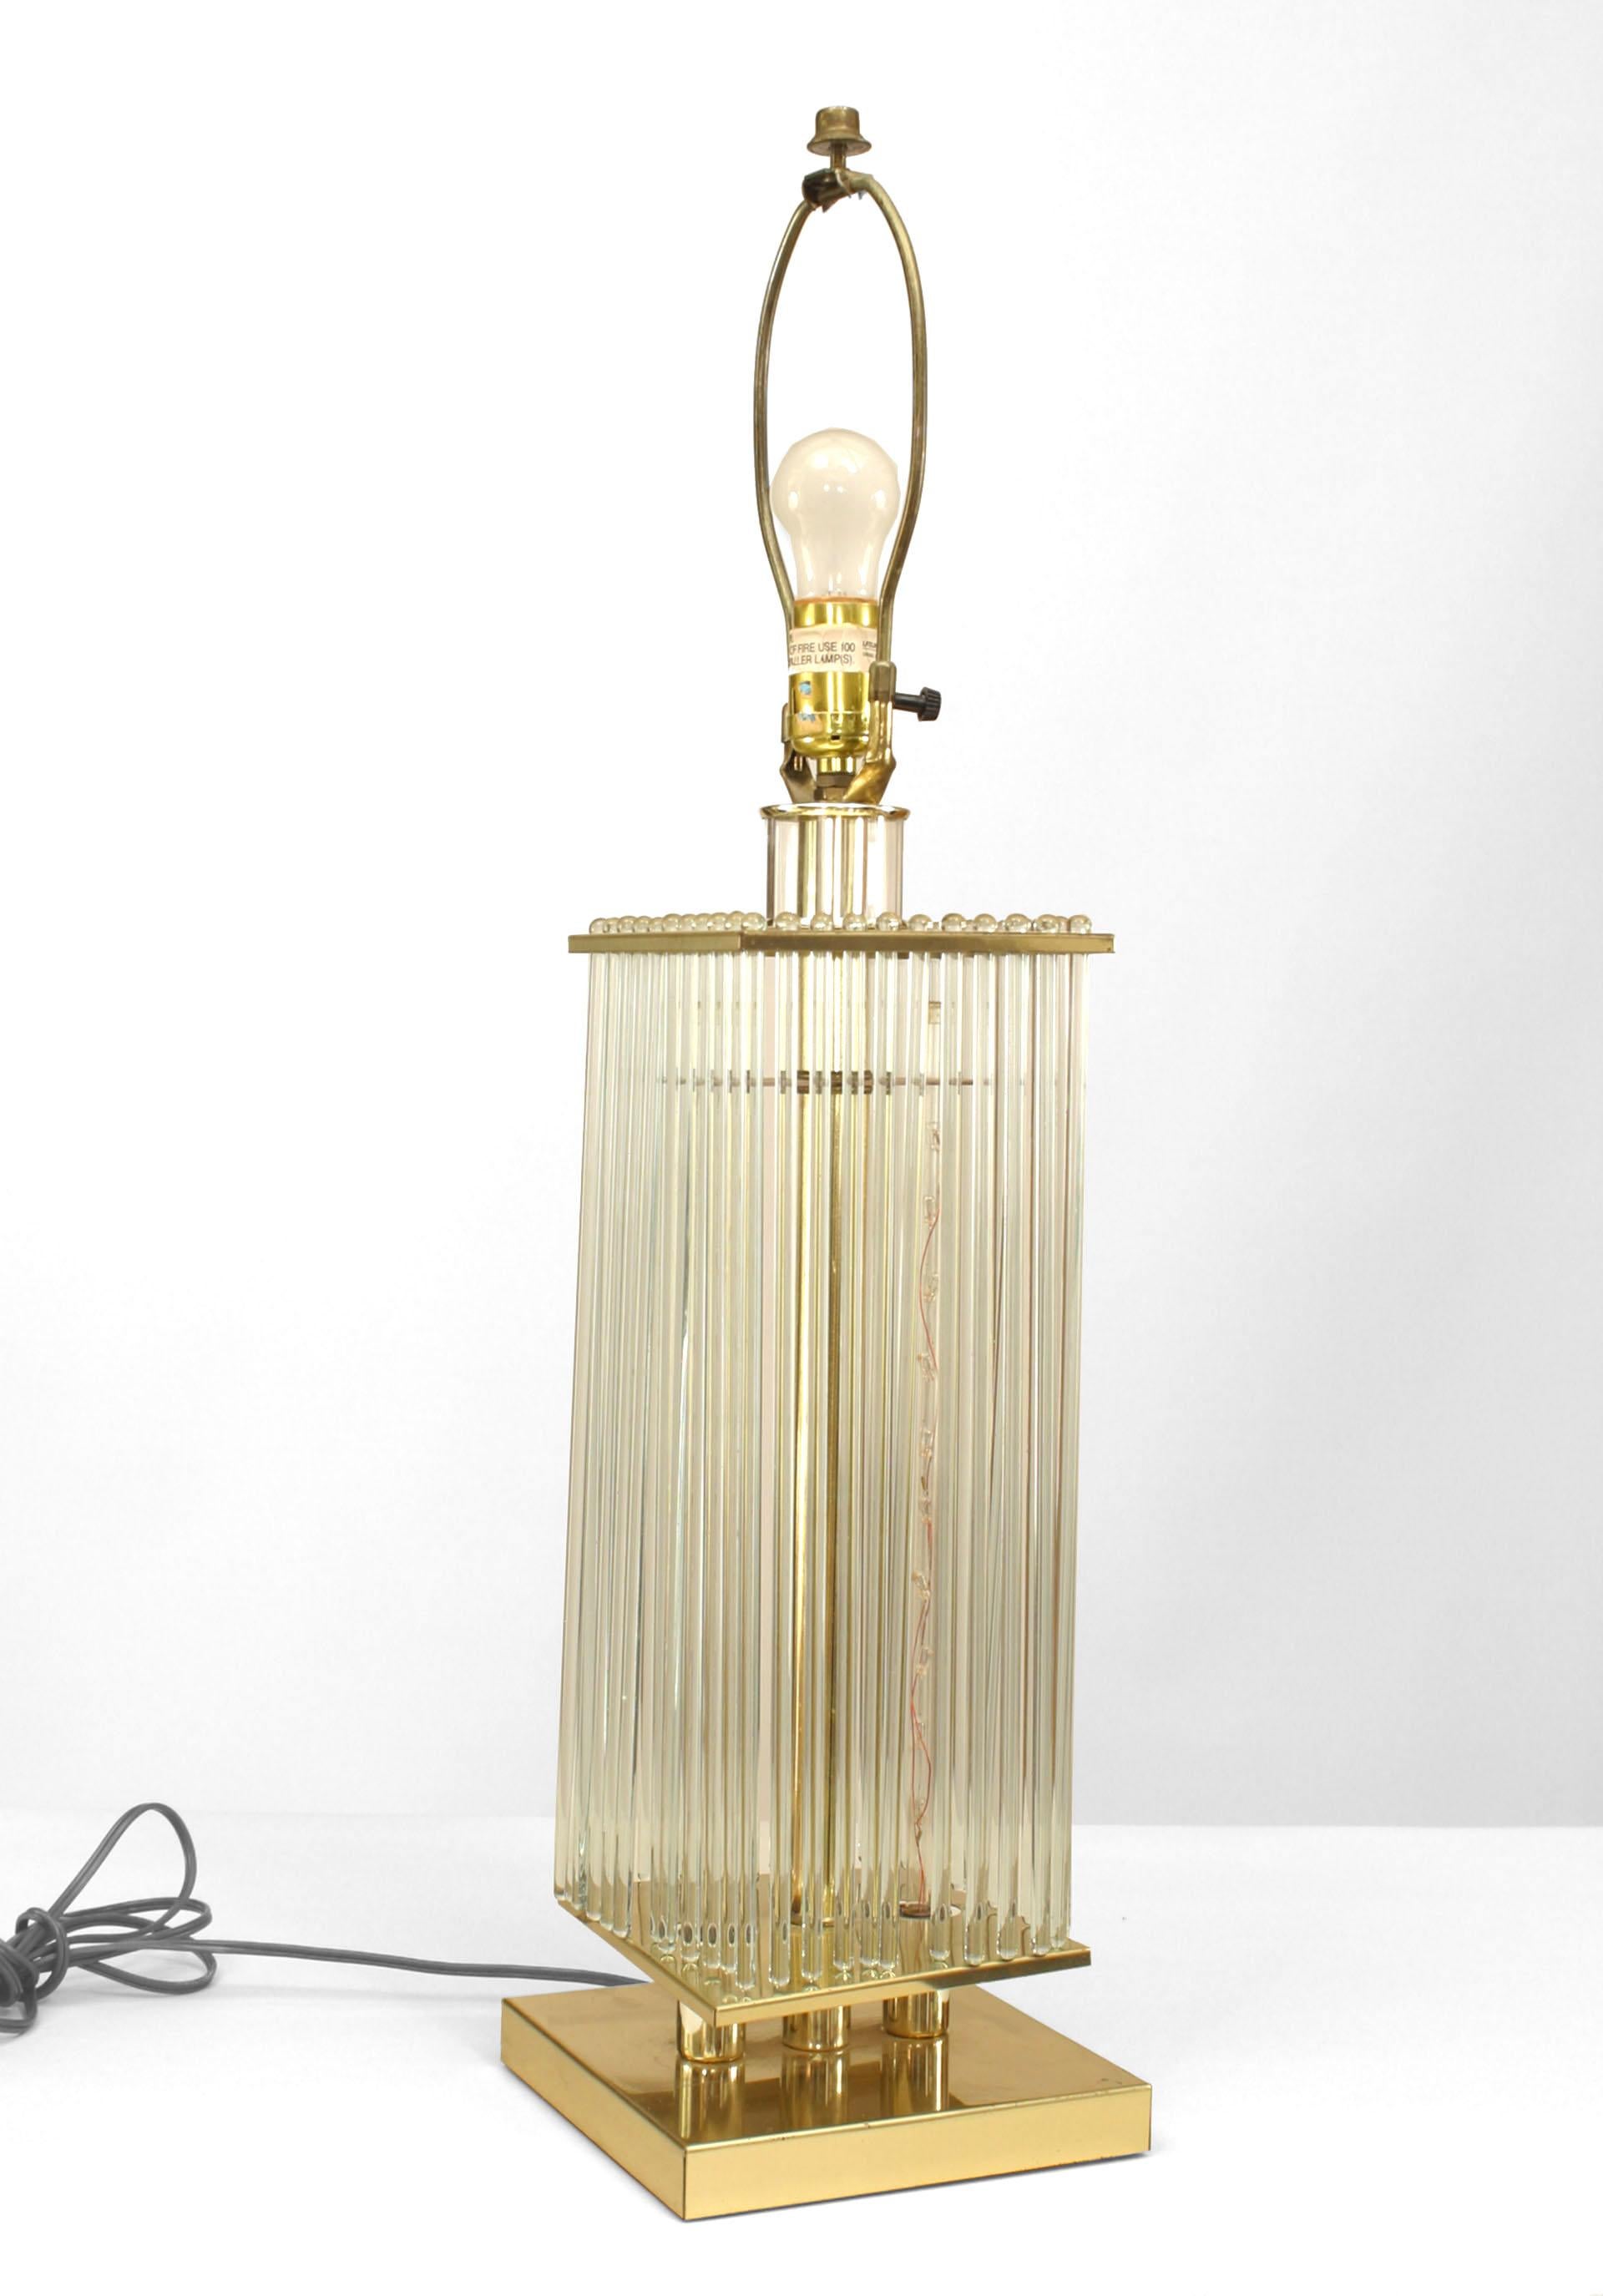 Contemporary design table lamp with a square brass base under clear tubular glass rods surrounding a brass centre post and two internal glass rods with lights.
   